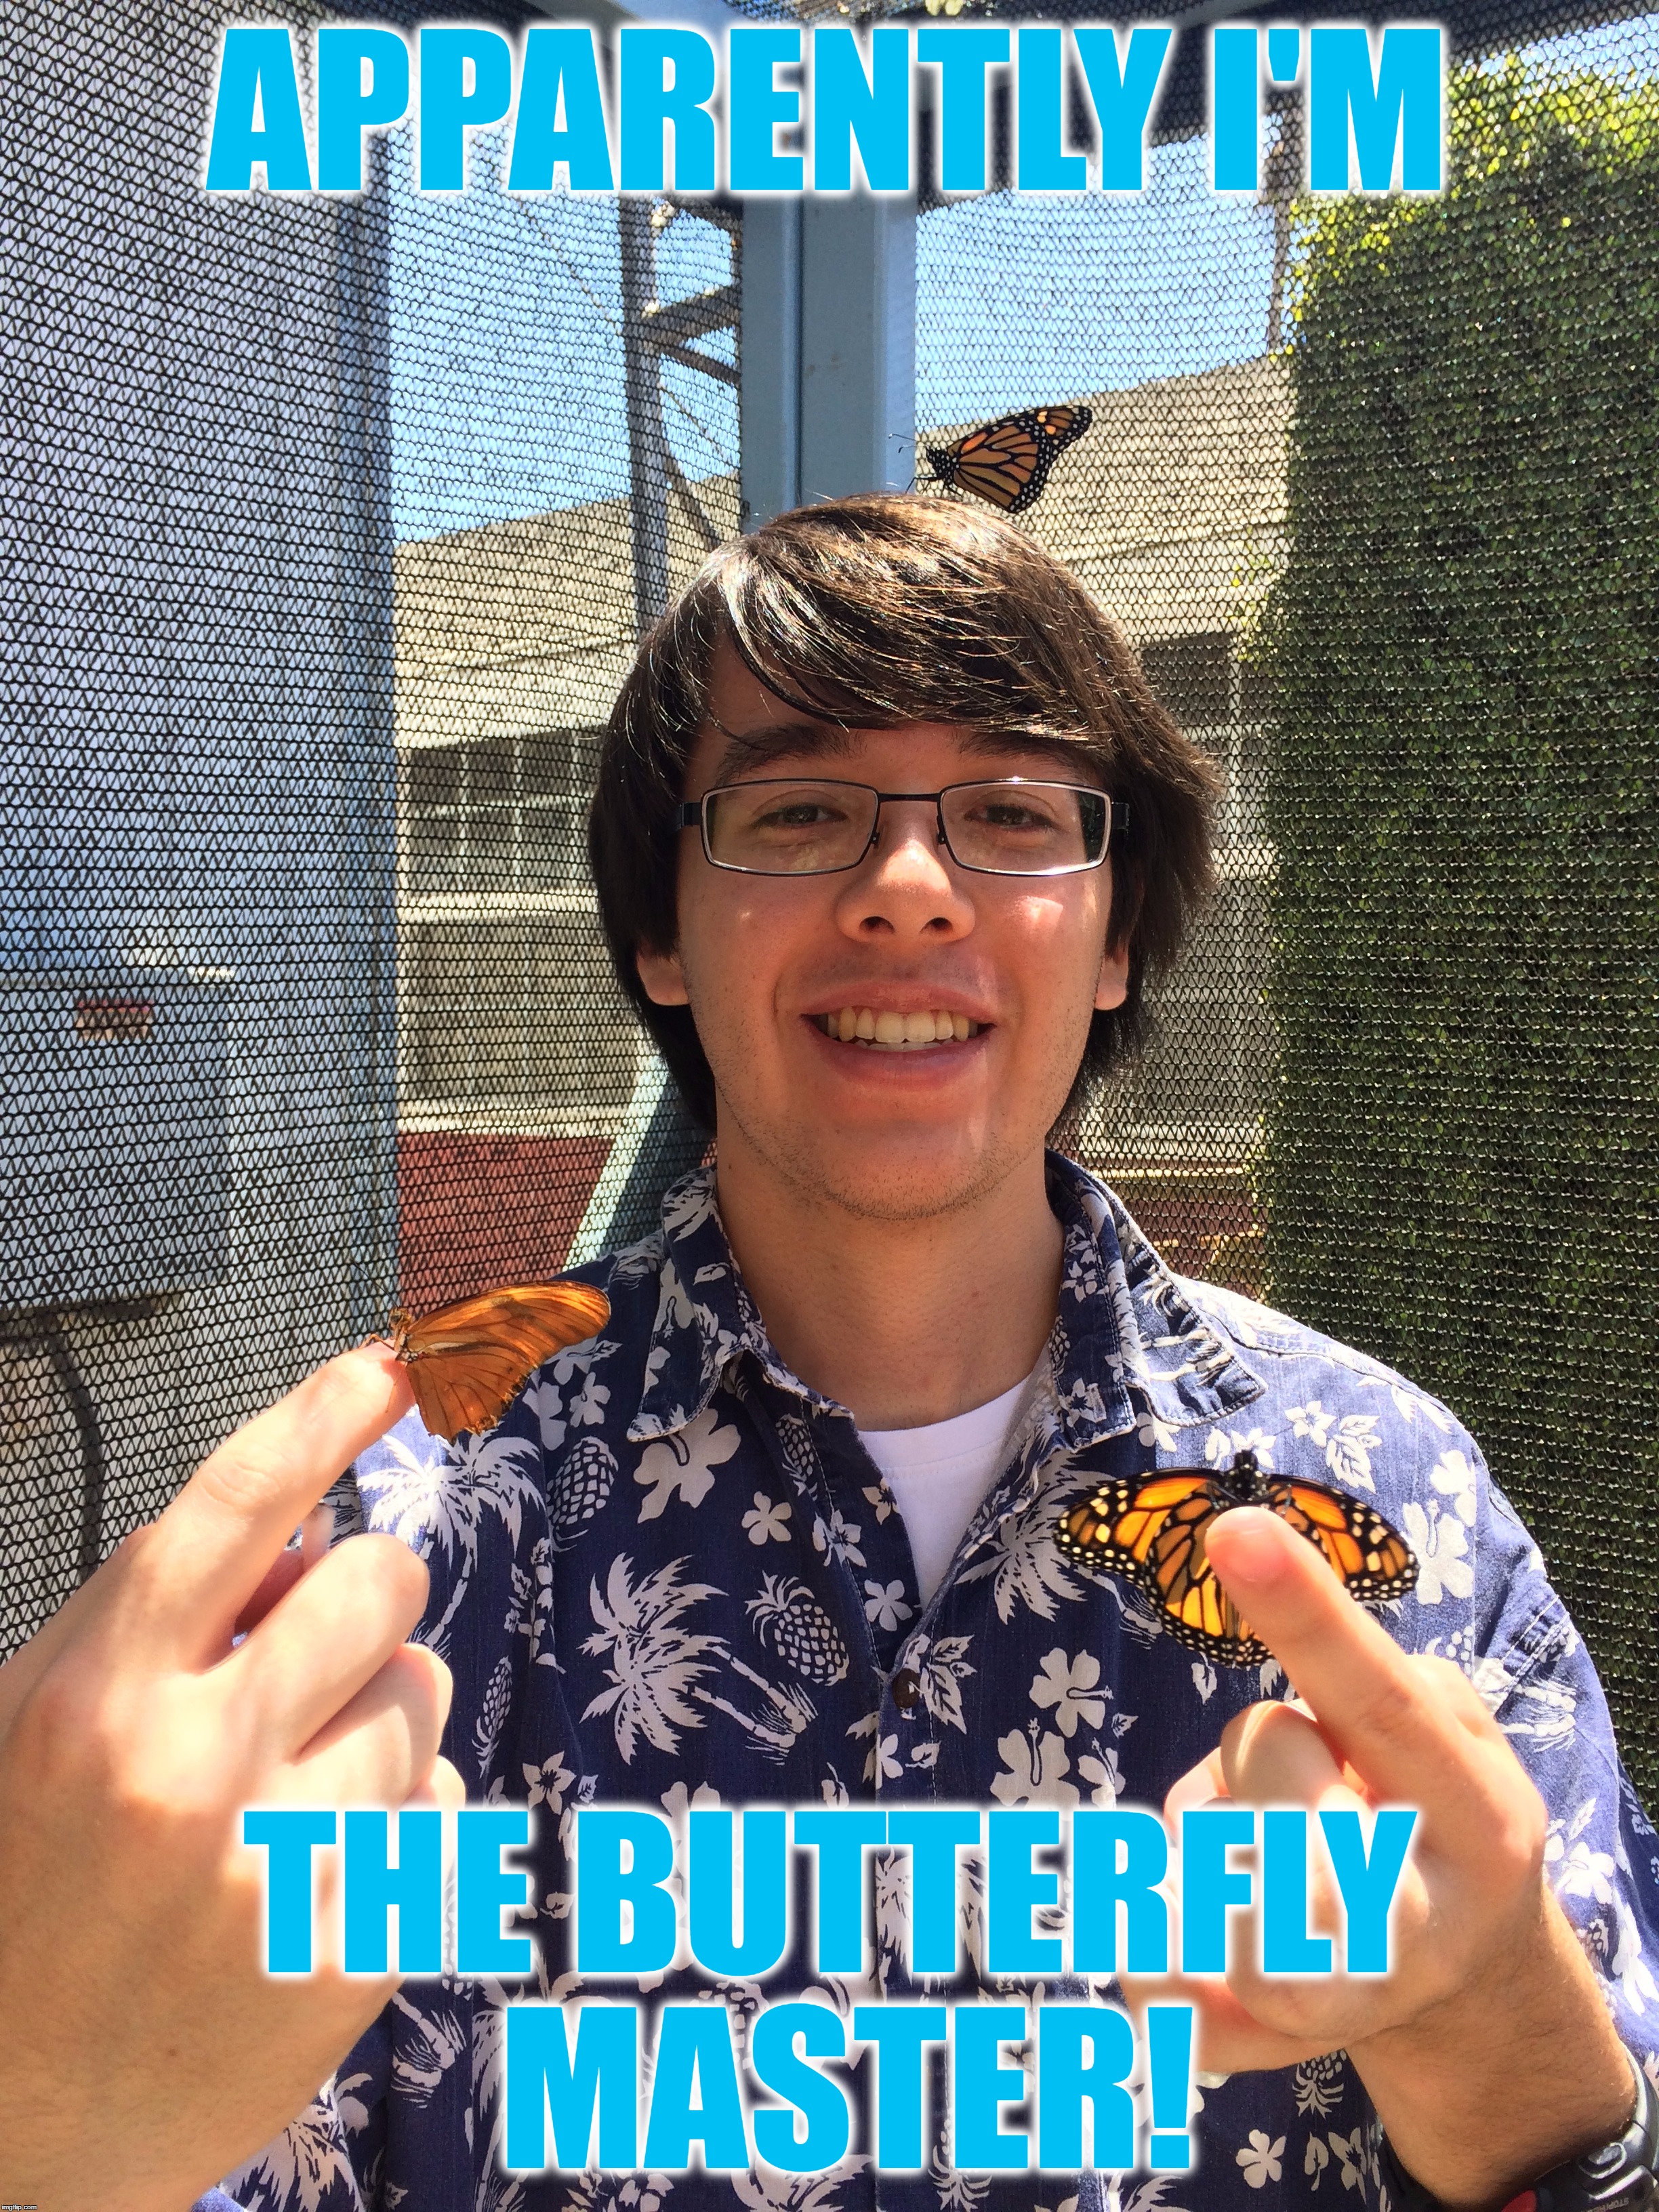 Went To The OC Fair For The 8 Year In A Row! | APPARENTLY I'M; THE BUTTERFLY MASTER! | image tagged in memes,juicydeath1025,funny,butterflies,butterflies butterflies everywhere,oc fair | made w/ Imgflip meme maker